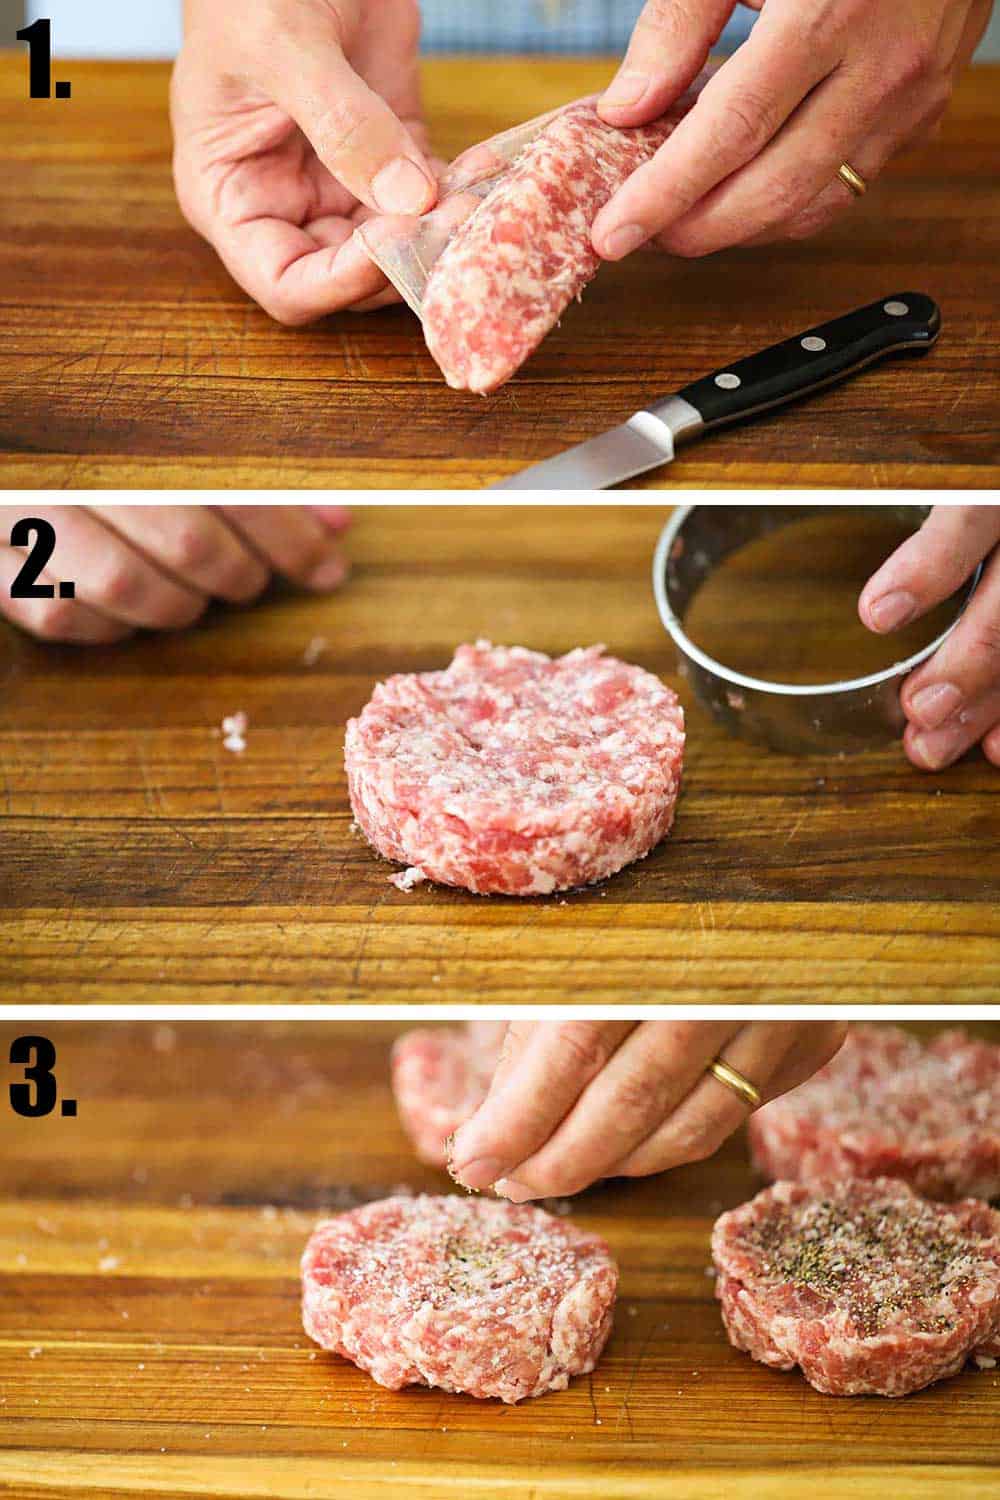 3 stacked photos, 1st is a hand removing sausage casing, next a pattie being formed, next is seasoning being added. 